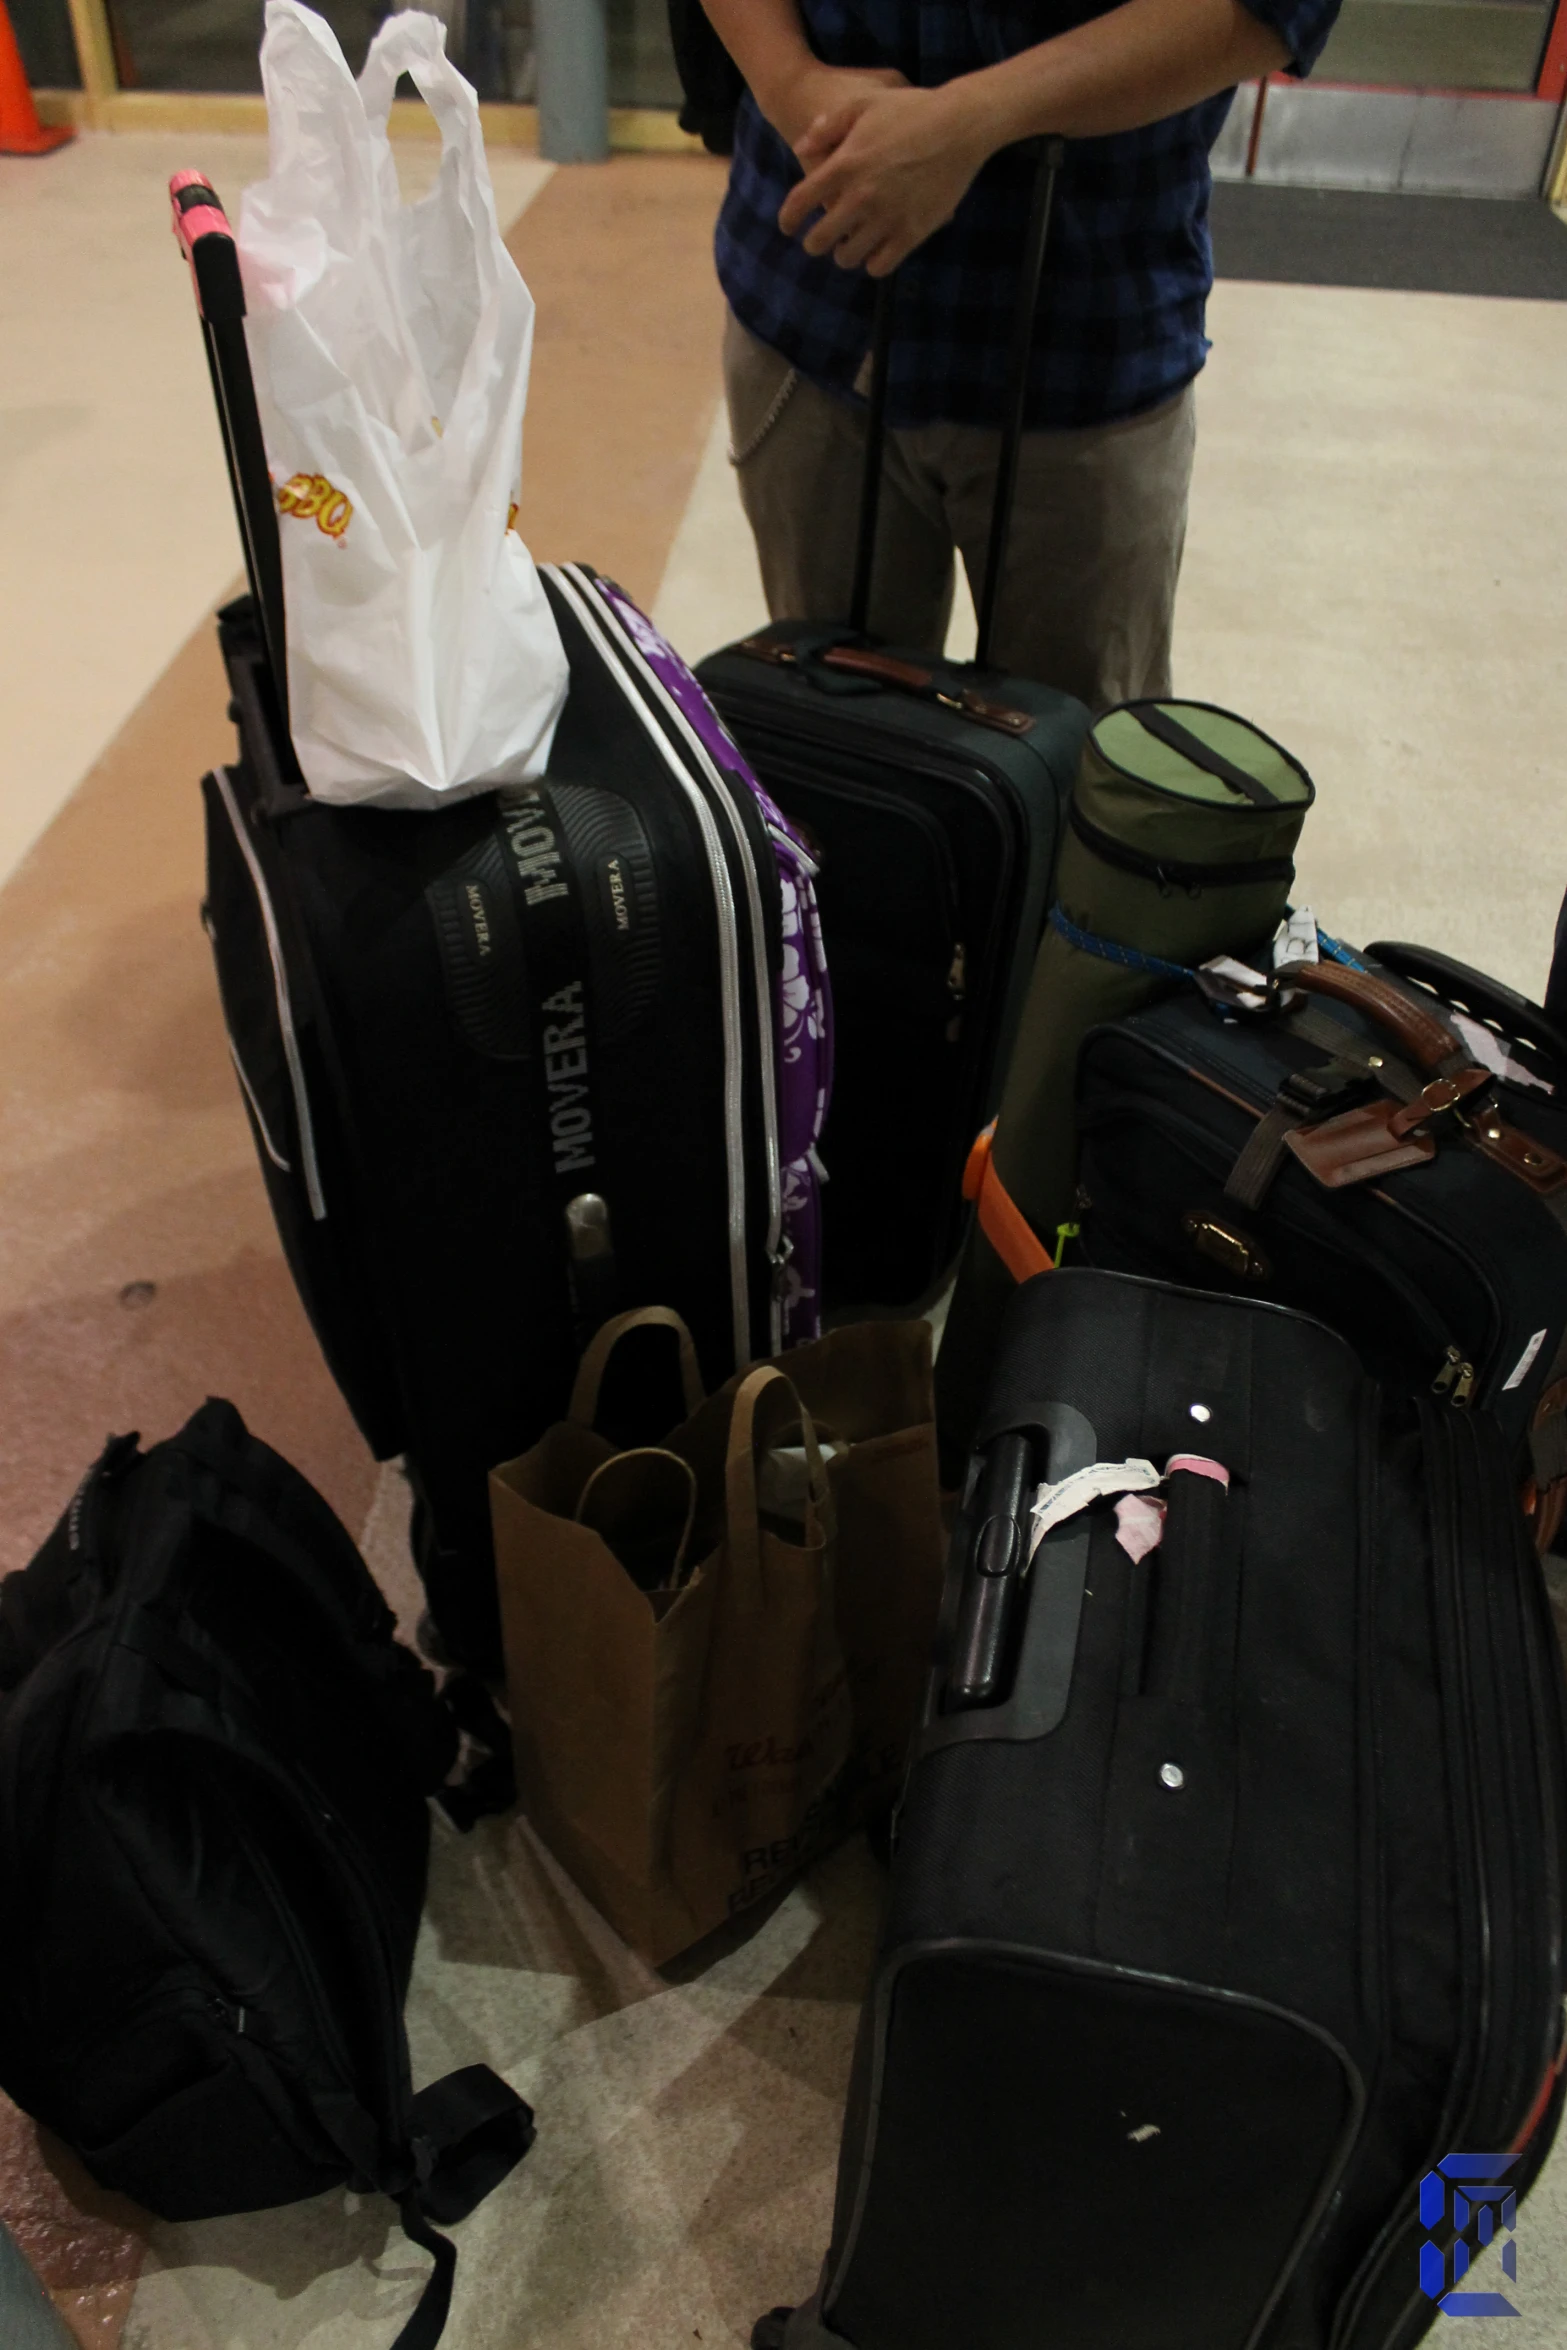 a man standing next to many bags of luggage